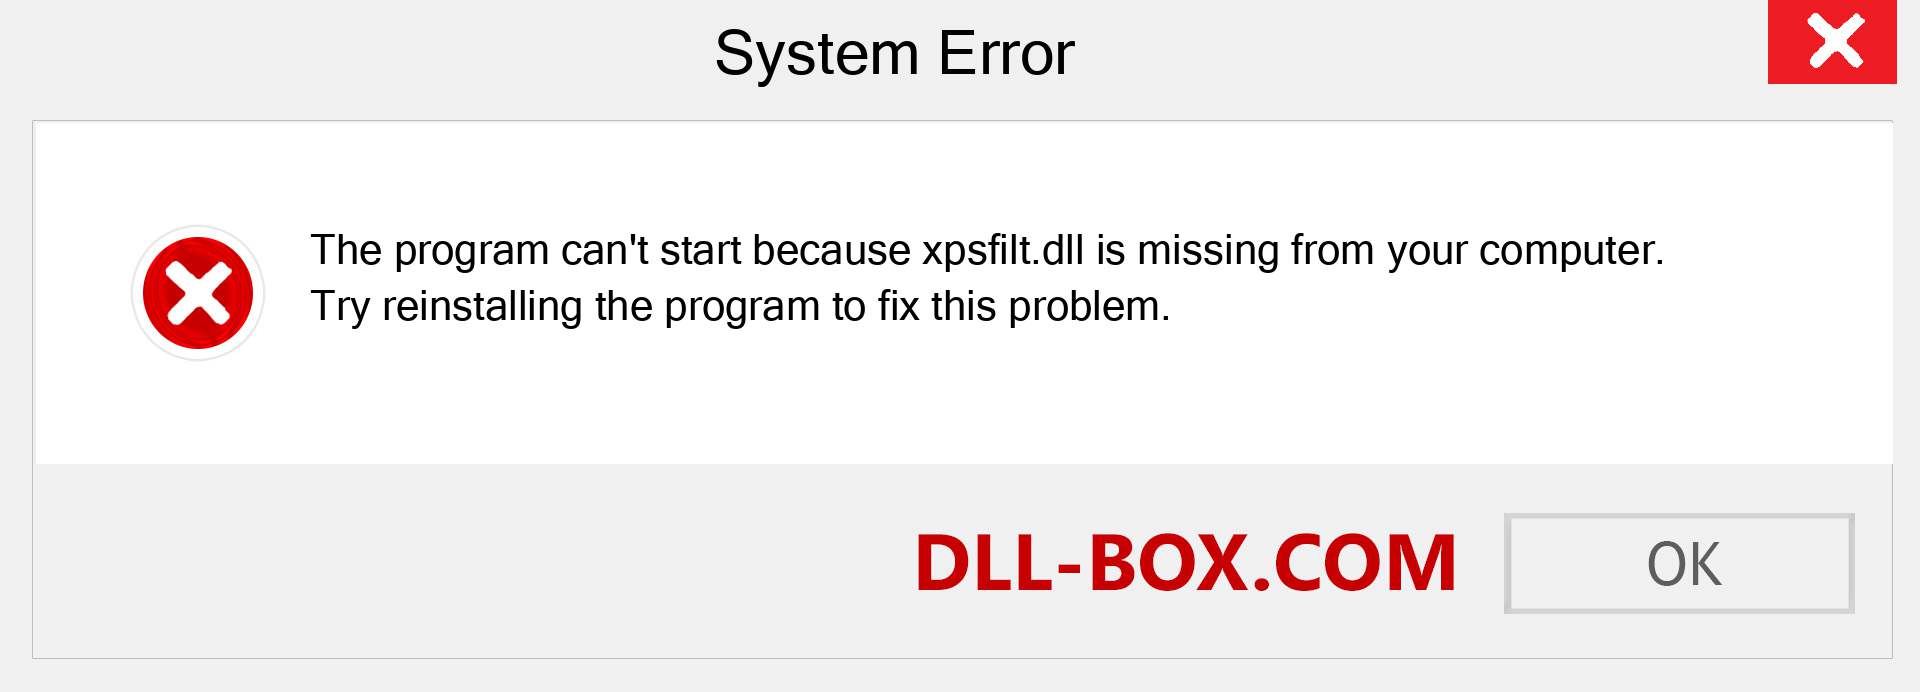  xpsfilt.dll file is missing?. Download for Windows 7, 8, 10 - Fix  xpsfilt dll Missing Error on Windows, photos, images